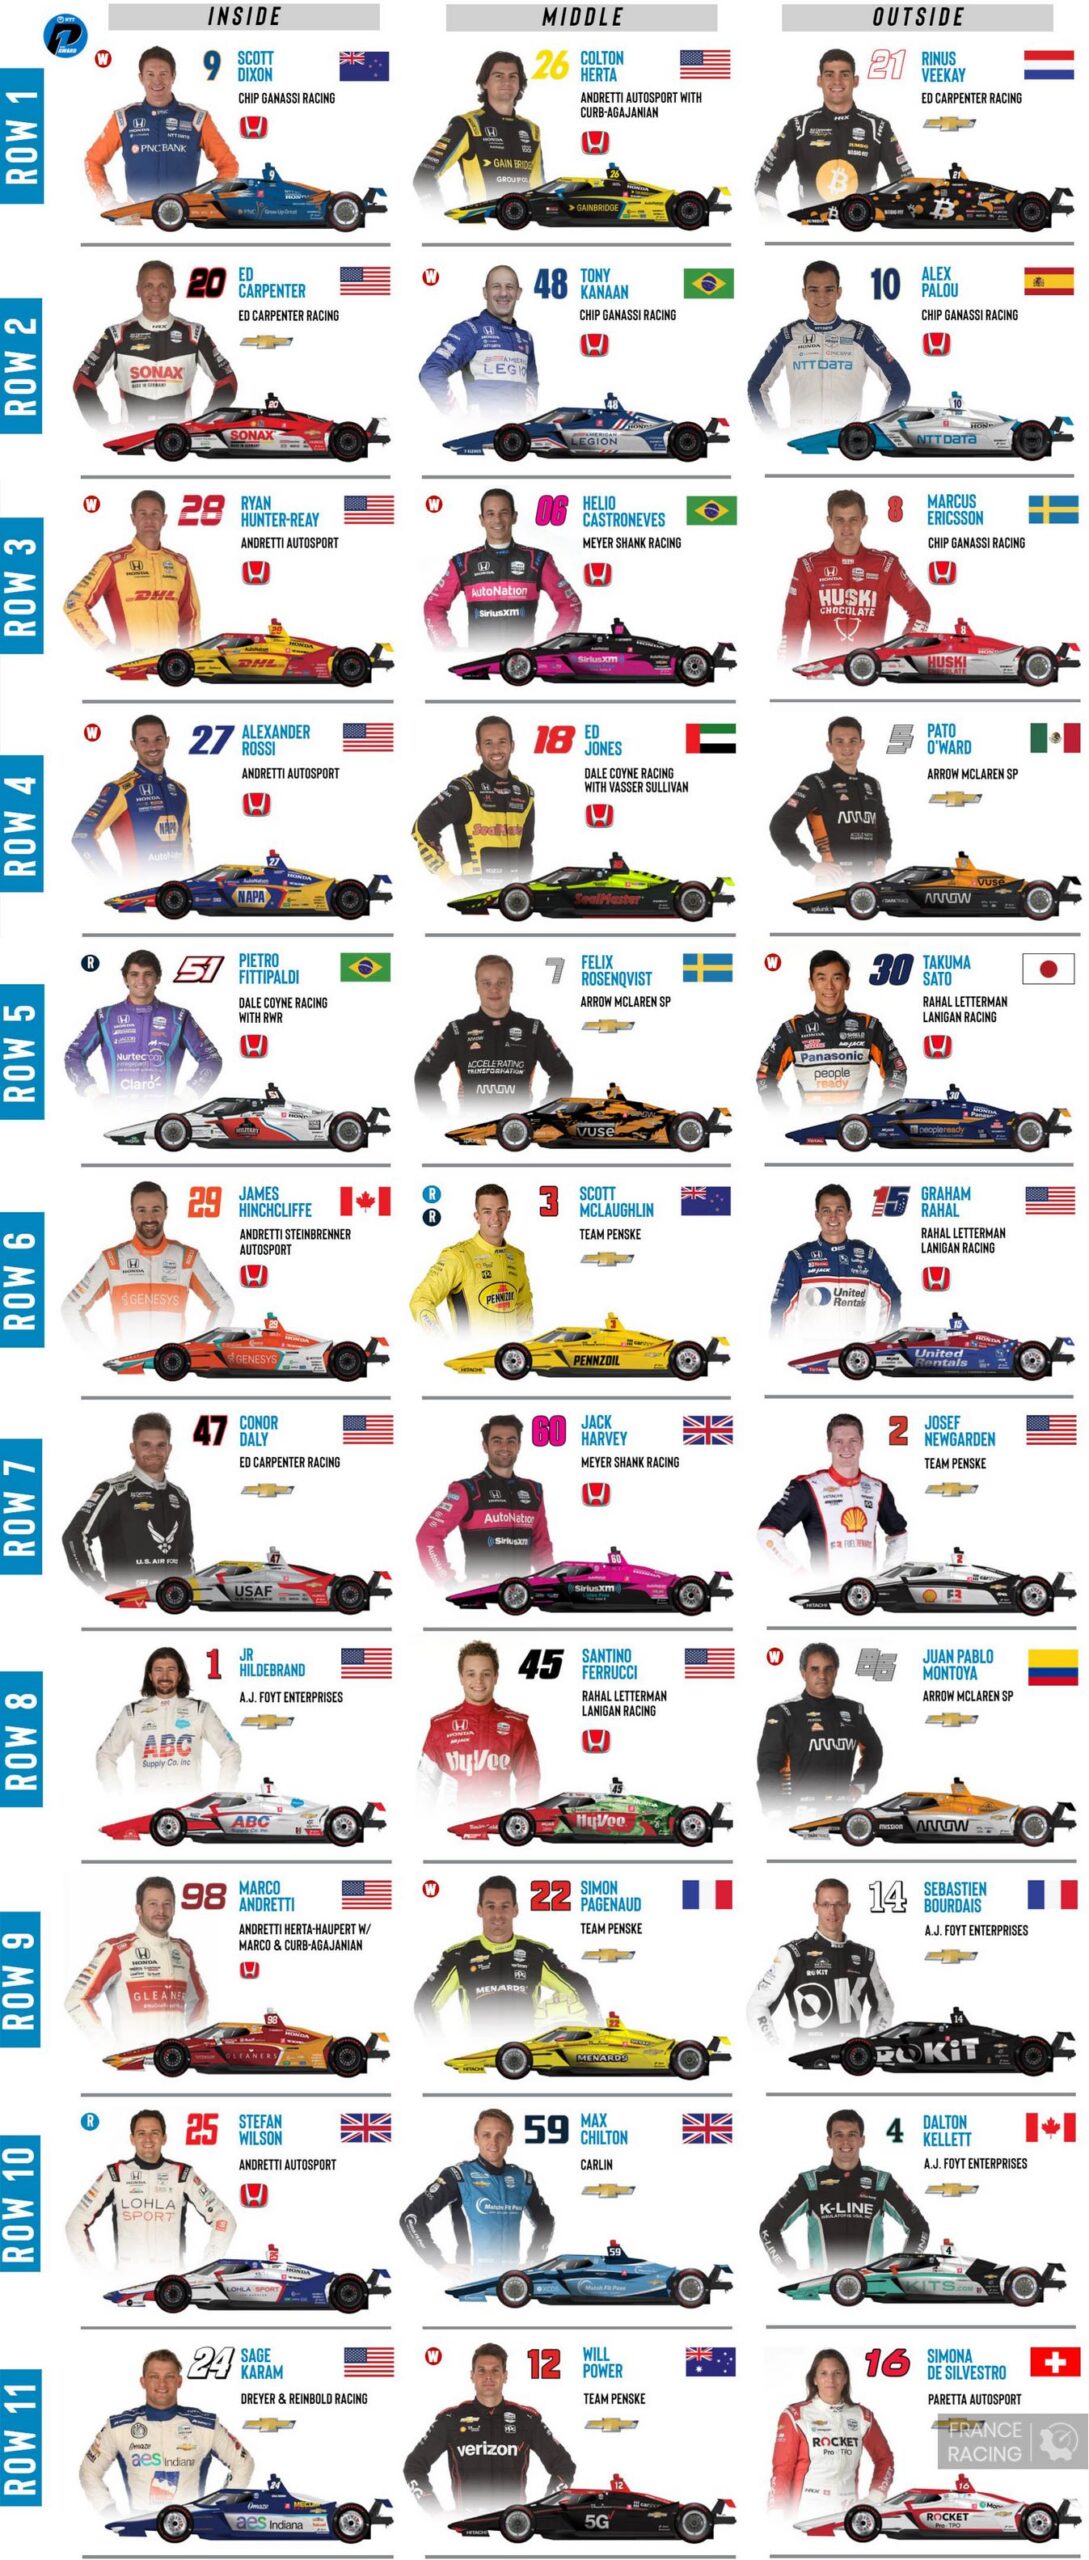 the starting grid for the 105th edition! US Sports